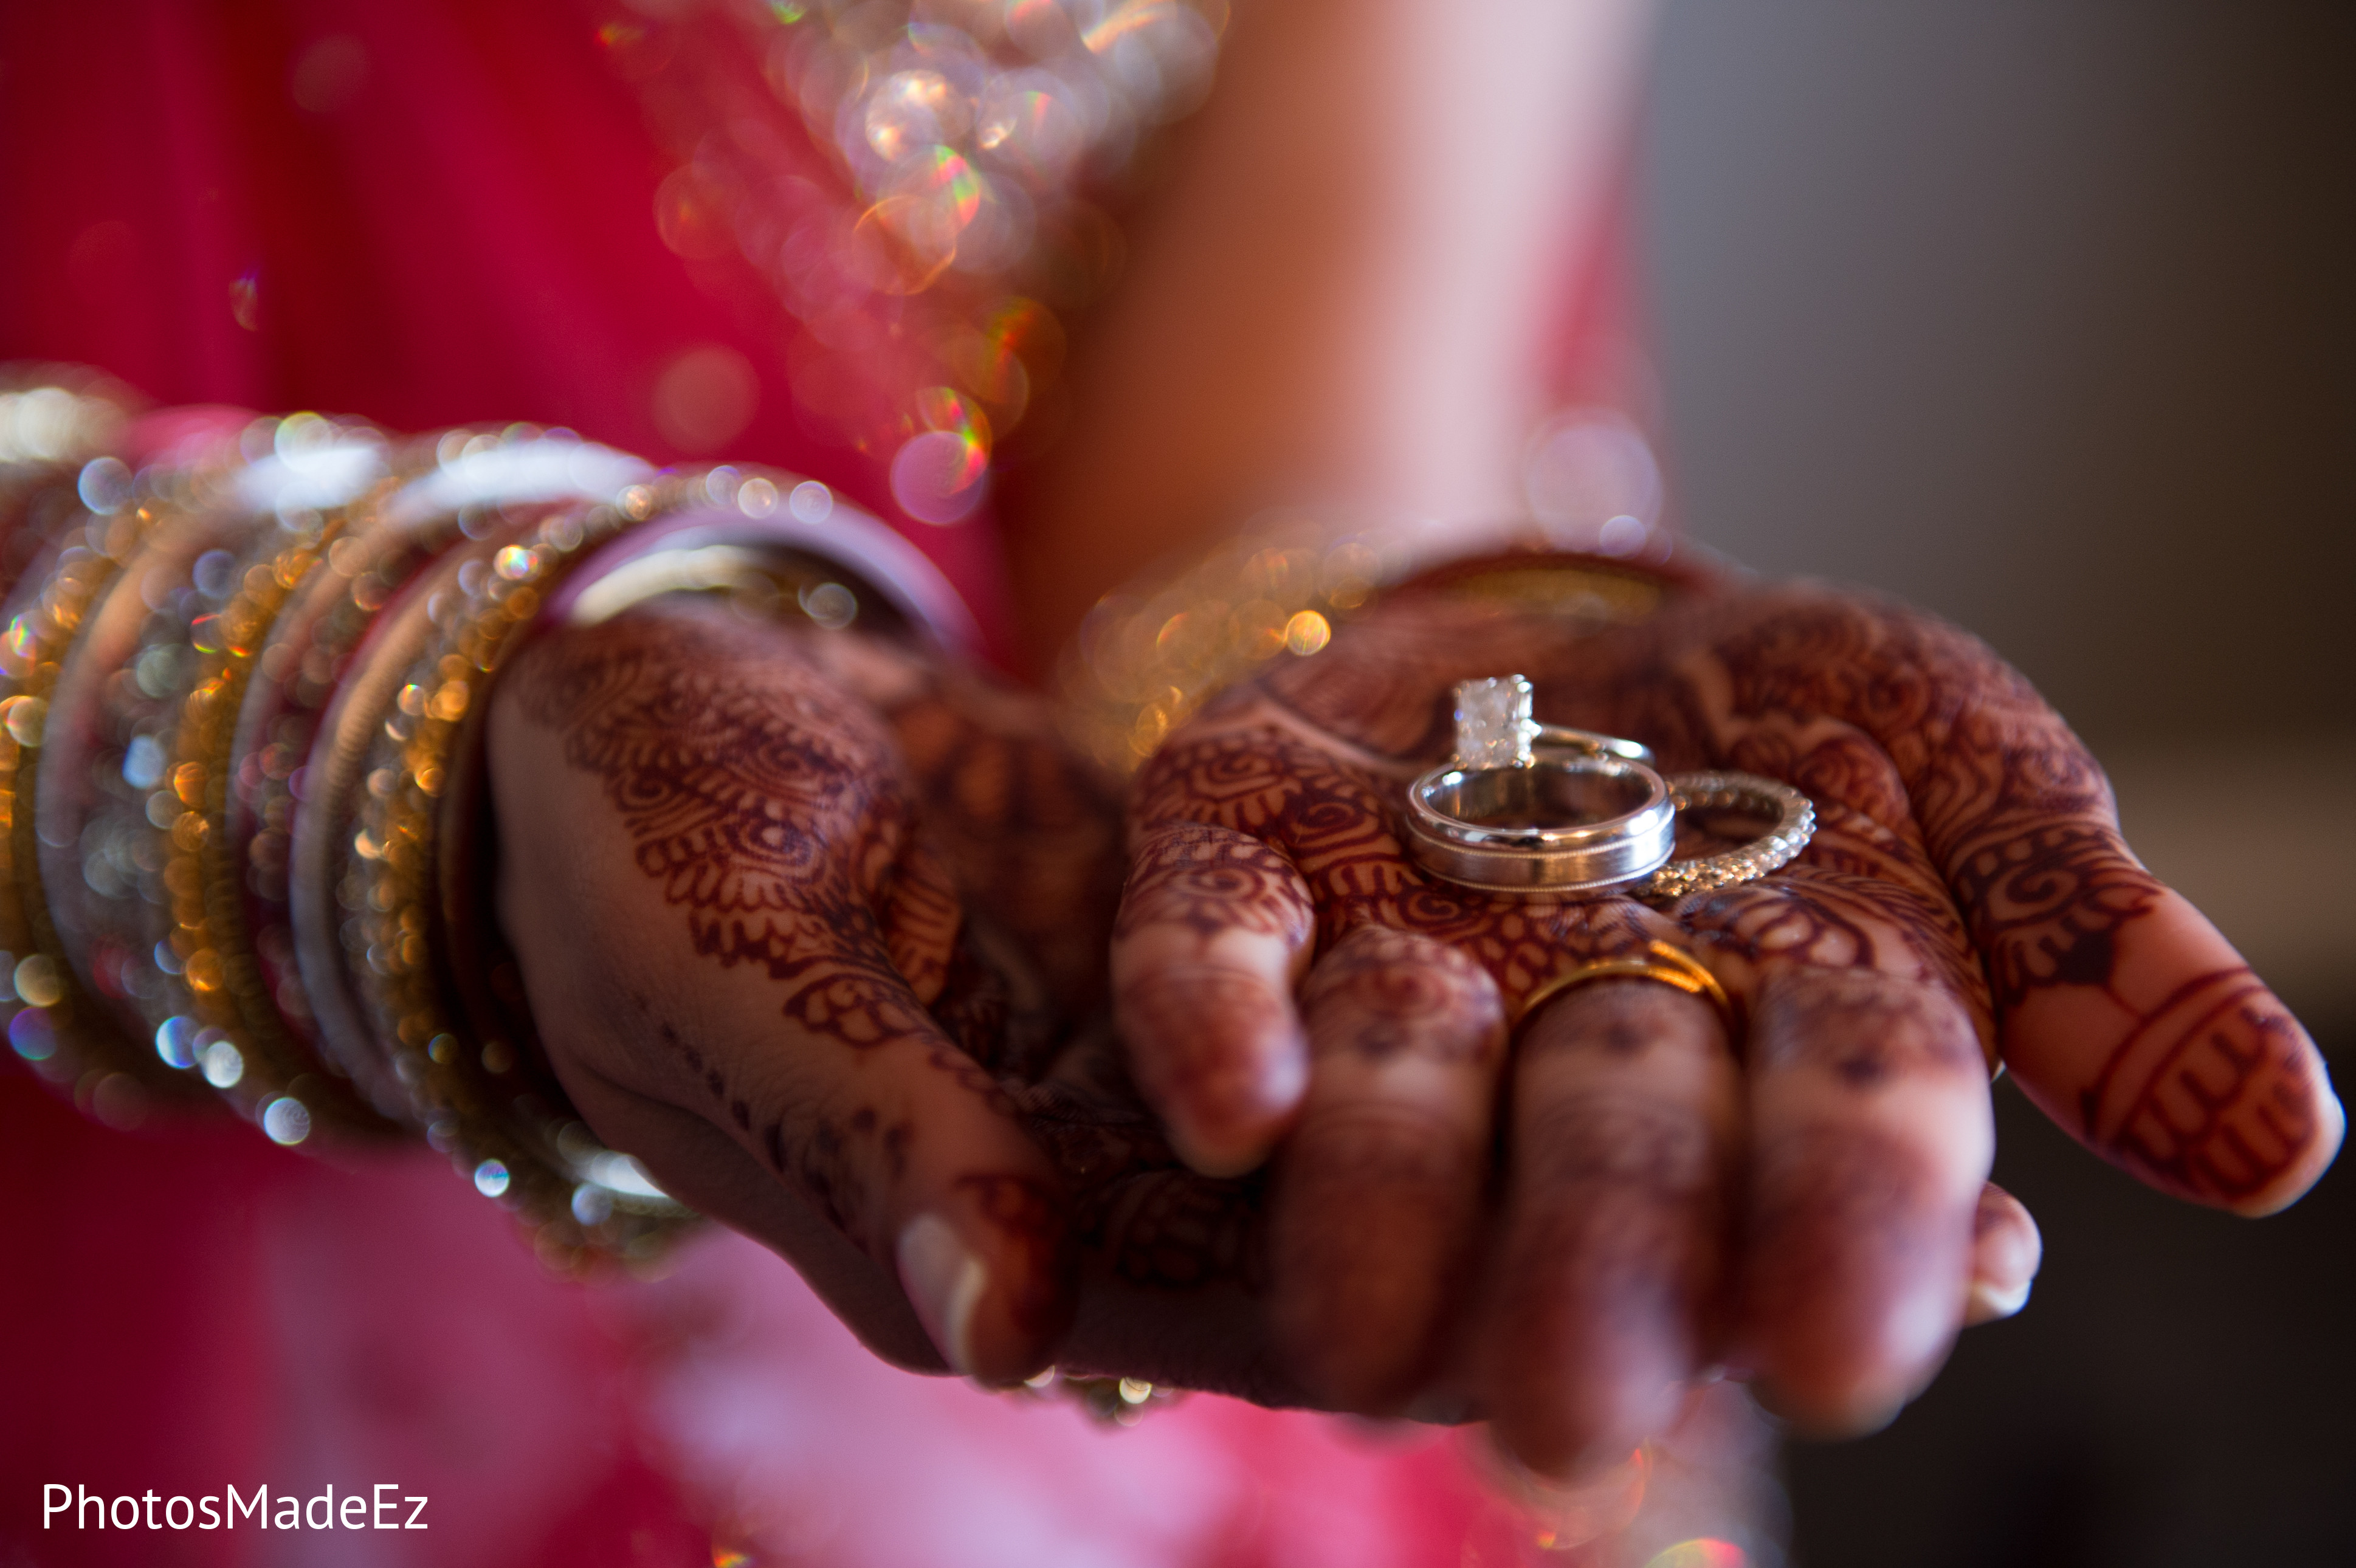 29 Indian Wedding Photos That Are As Joyful As They Are Colorful | HuffPost  Life